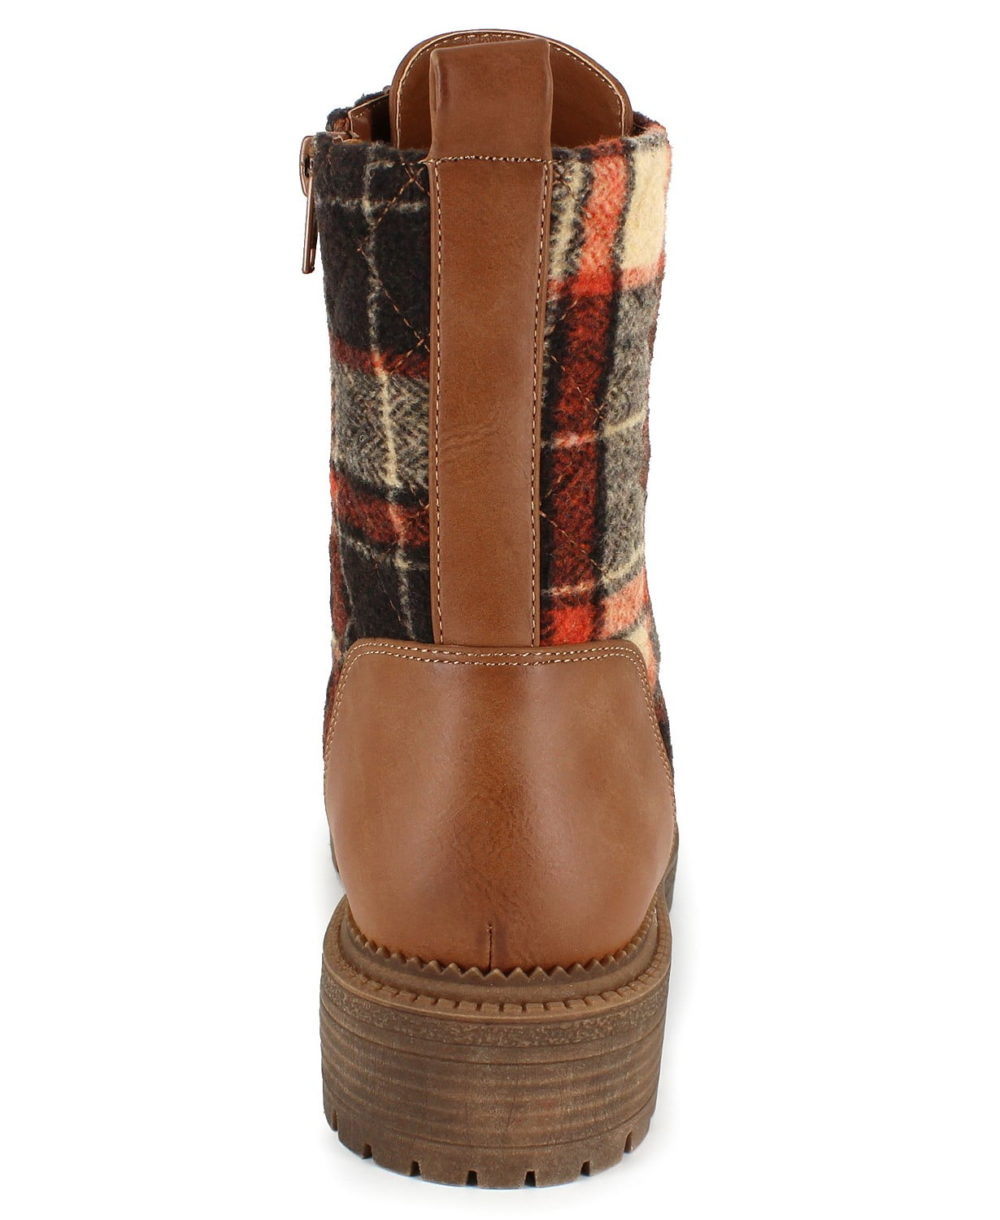 woocommerce-673321-2209615.cloudwaysapps.com-rock-amp-candy-womens-brown-plaid-max-booties